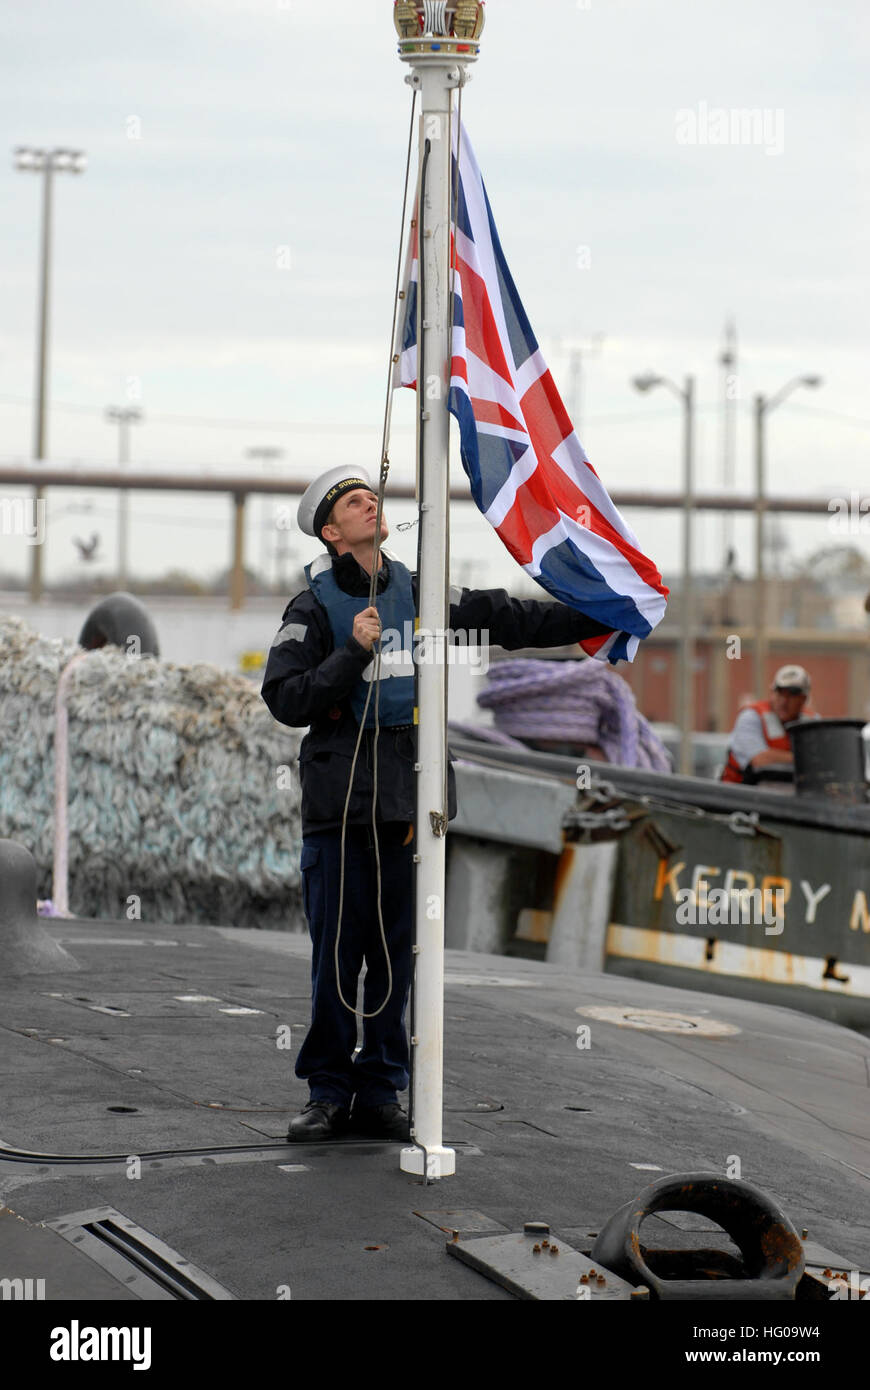 111128-N-NK458-092 NORFOLK (Nov. 28, 2011) A sailor assigned to the Royal Navy submarine HMS Astute (S119) prepares to raise the flag as the ship arrives at Naval Station Norfolk. Astute is the first in a new class of British nuclear submarines that sets the standard for the Royal Navy in terms of weapons load, communication facilities and stealth. Commissioned on Aug. 27, 2010, the 323-foot, 7,400-ton submarine carries a crew of 98 officers and enlisted personnel, and can travel at speeds of 29-plus knots while submerged. (U.S. Navy photo by Mass Communication Specialist 1st Class Todd A. Sch Stock Photo